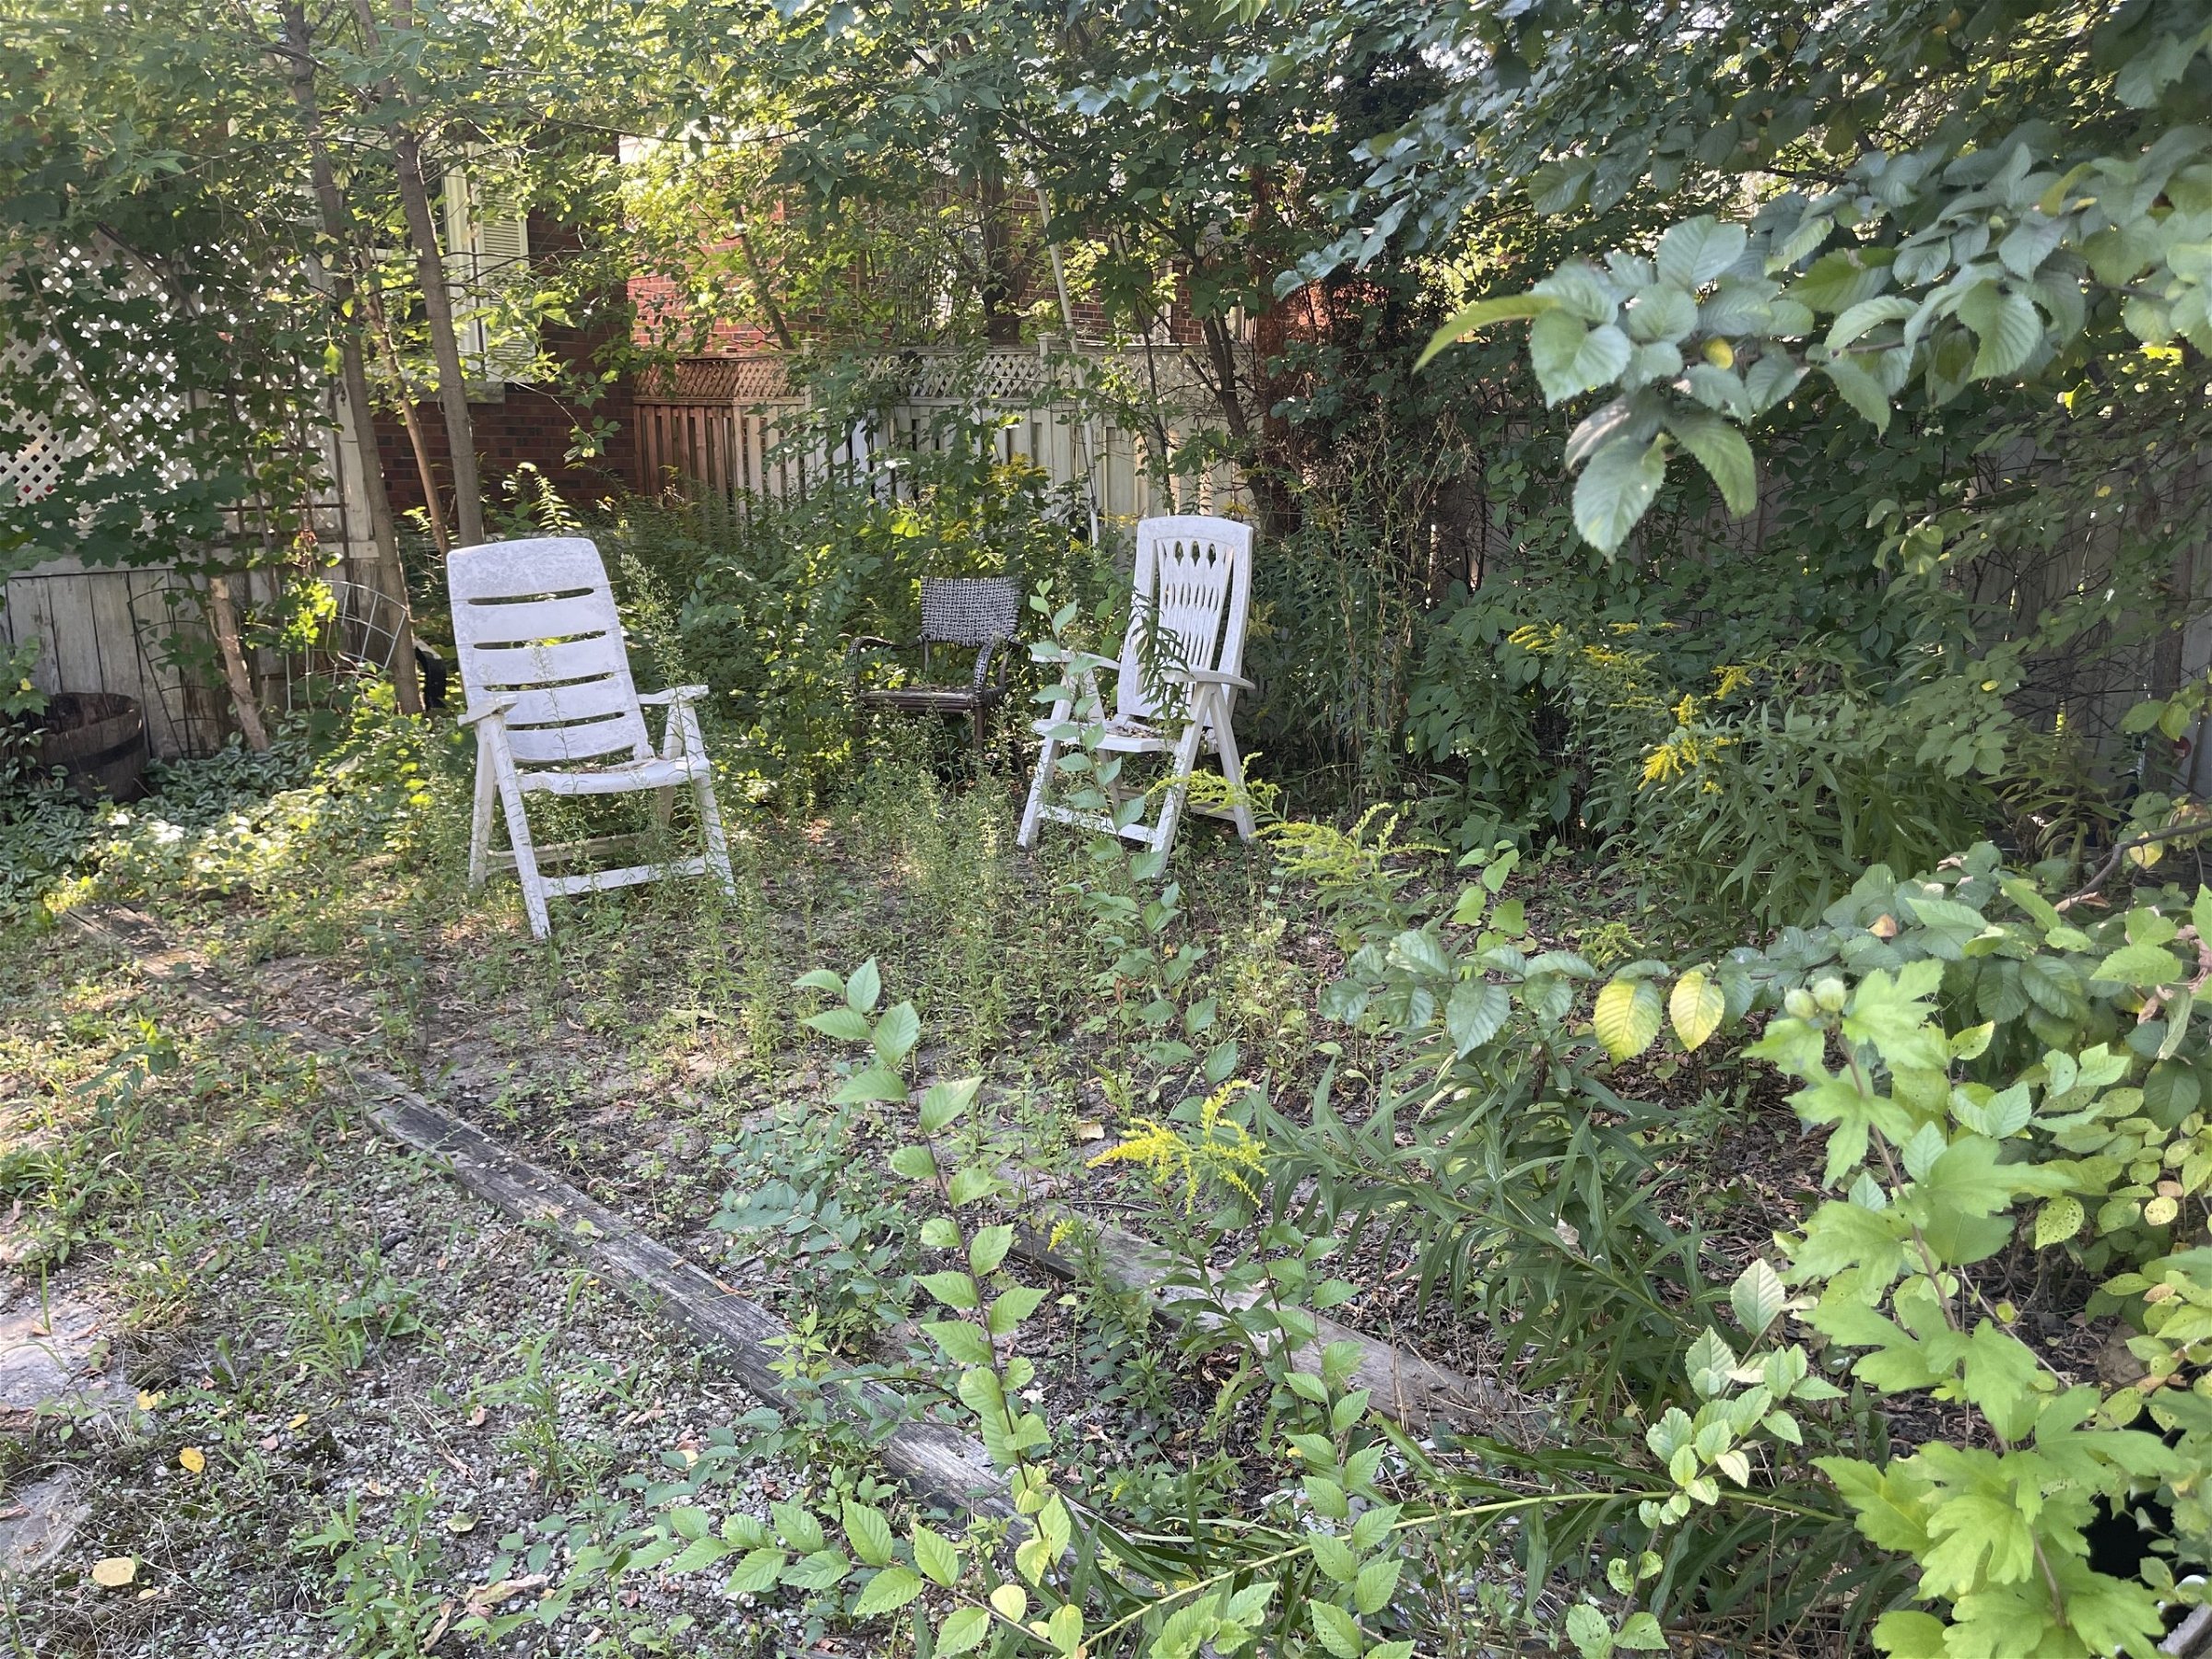 Unused debris and chairs lying on the yard that need to be removed